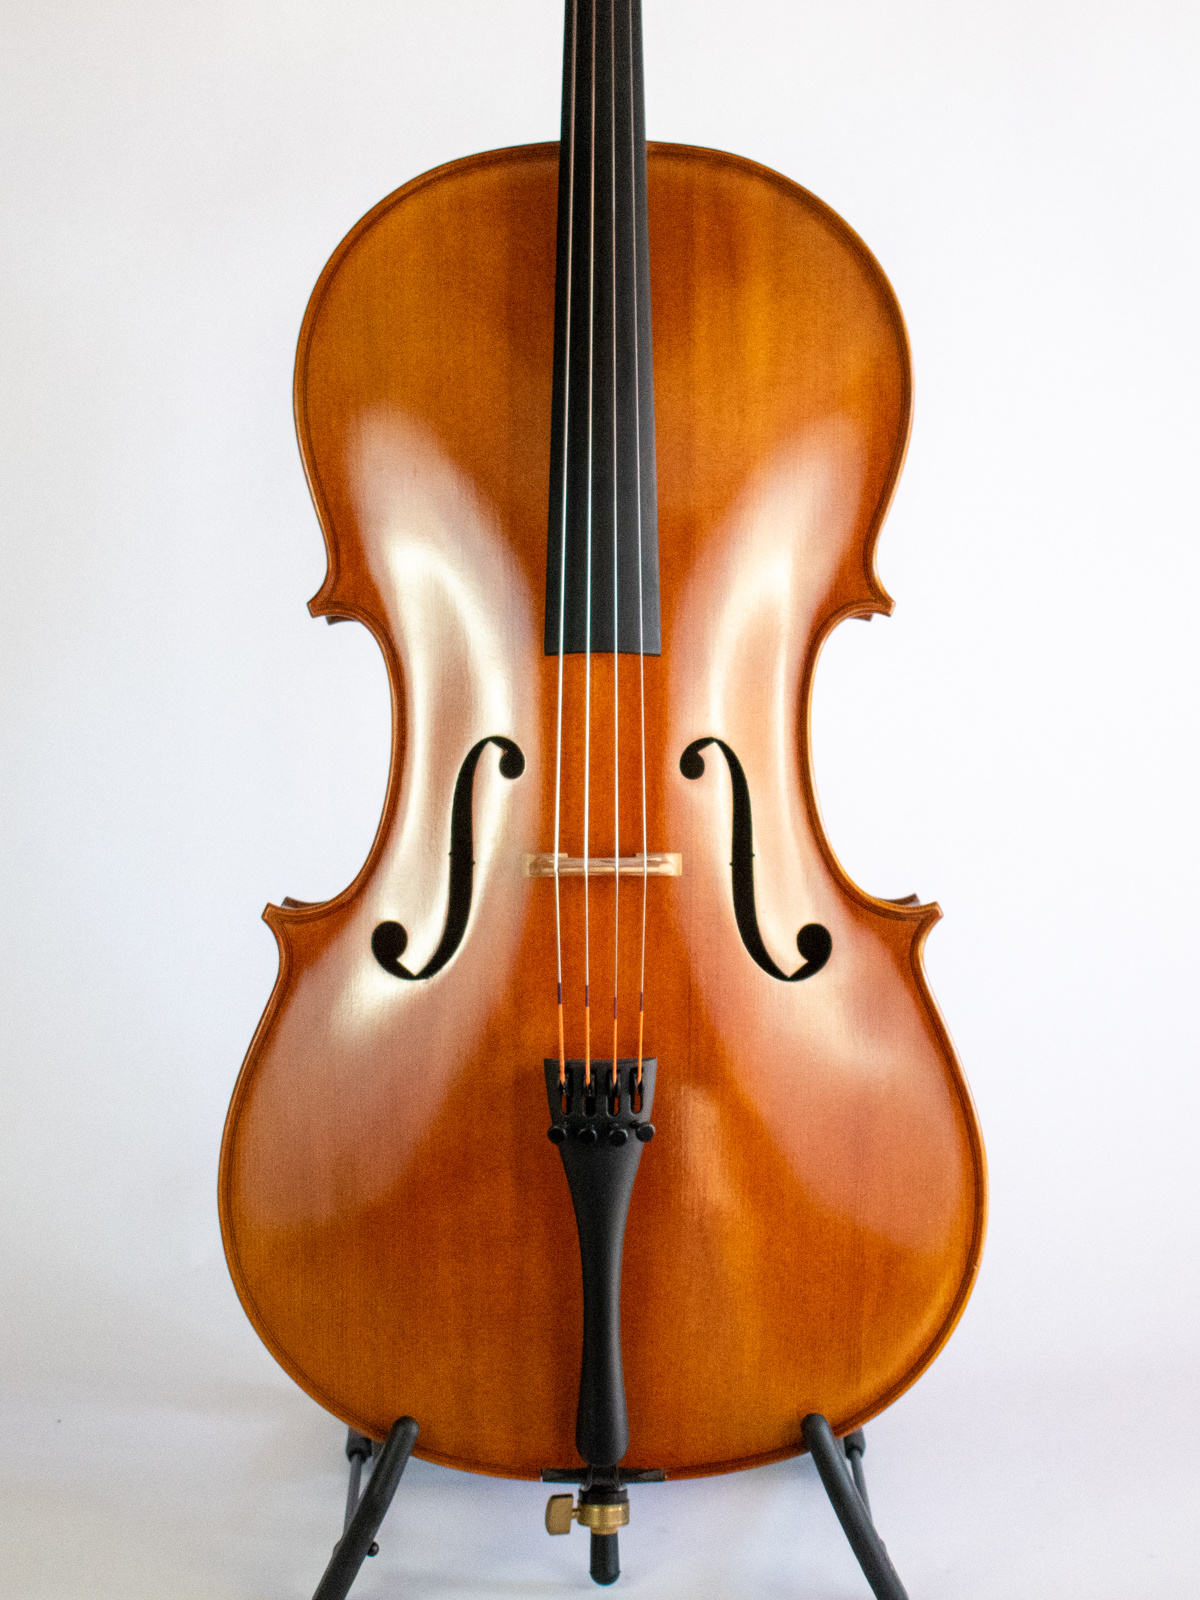 Serafina DX 1/2 cello, fully carved, with high quality strings, rosin, cloth